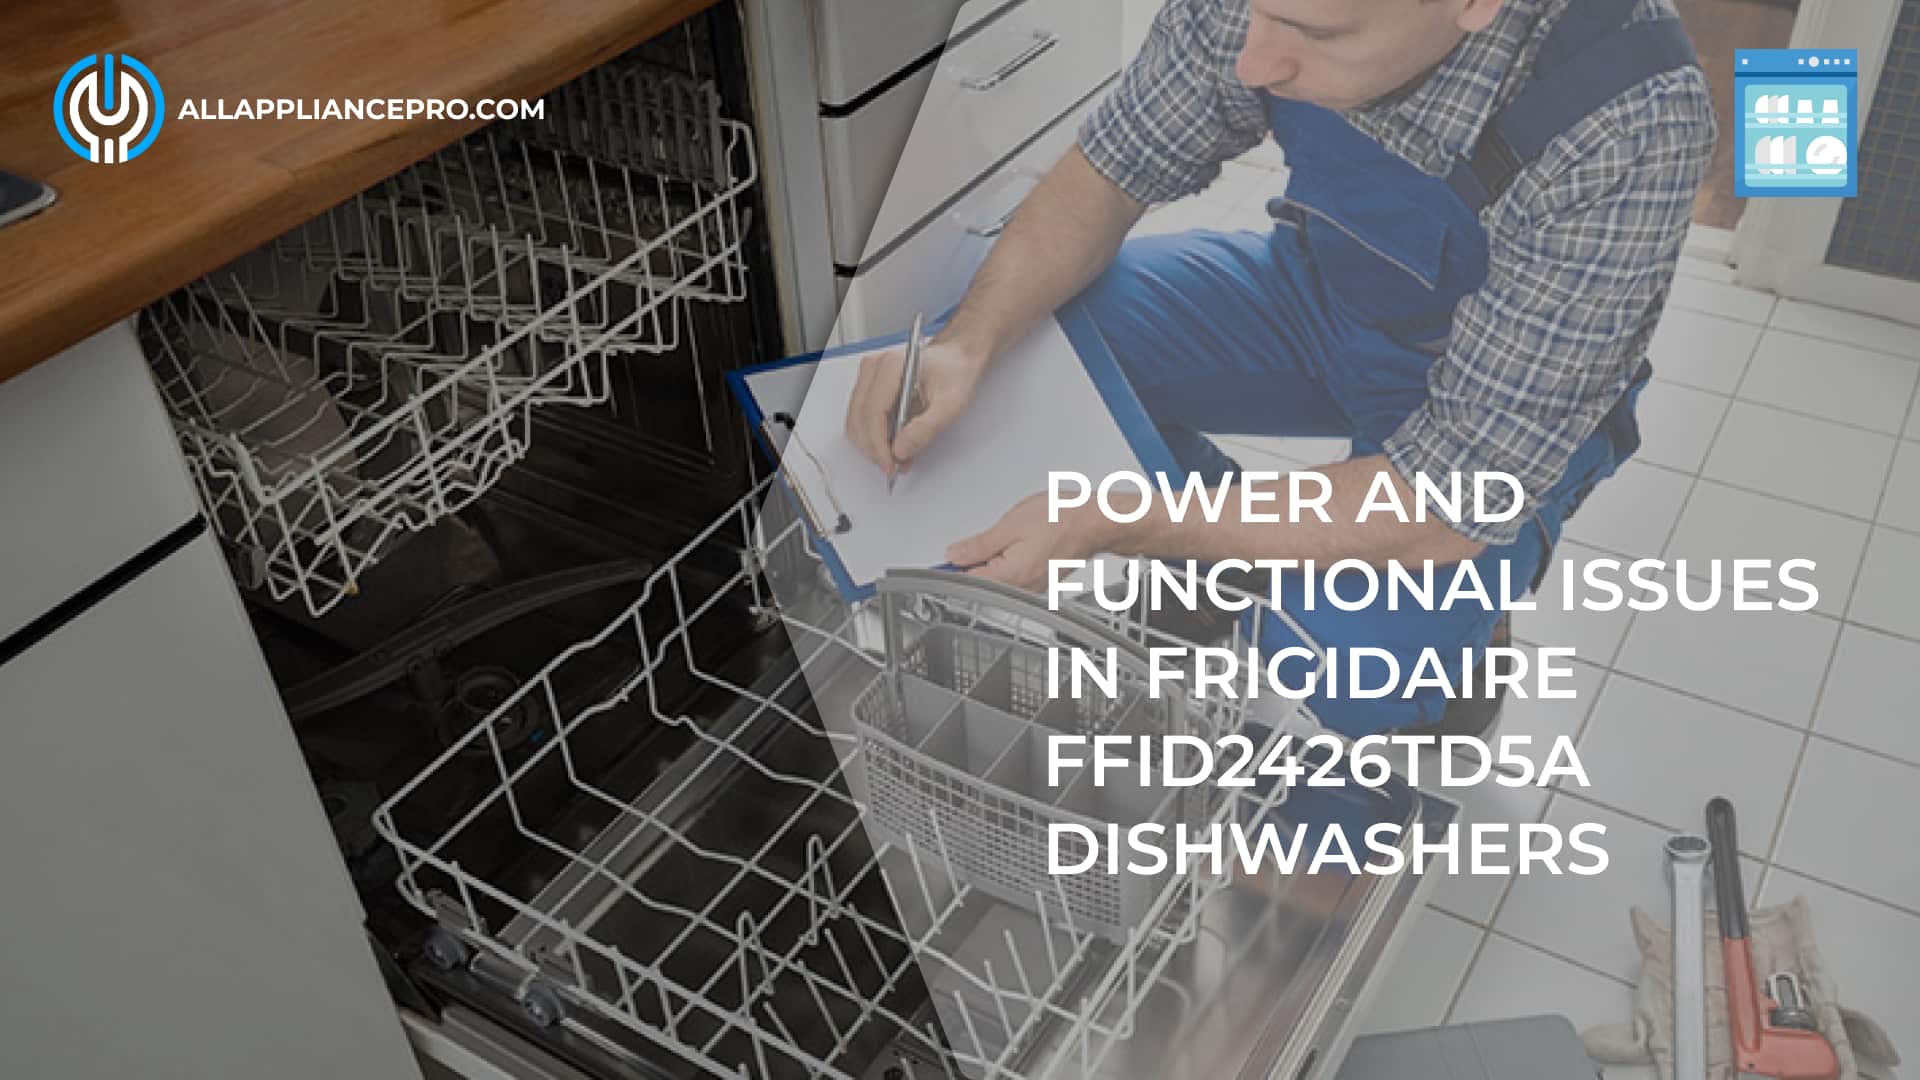 Power and Functional Issues in Frigidaire FFID2426TD5A Dishwashers